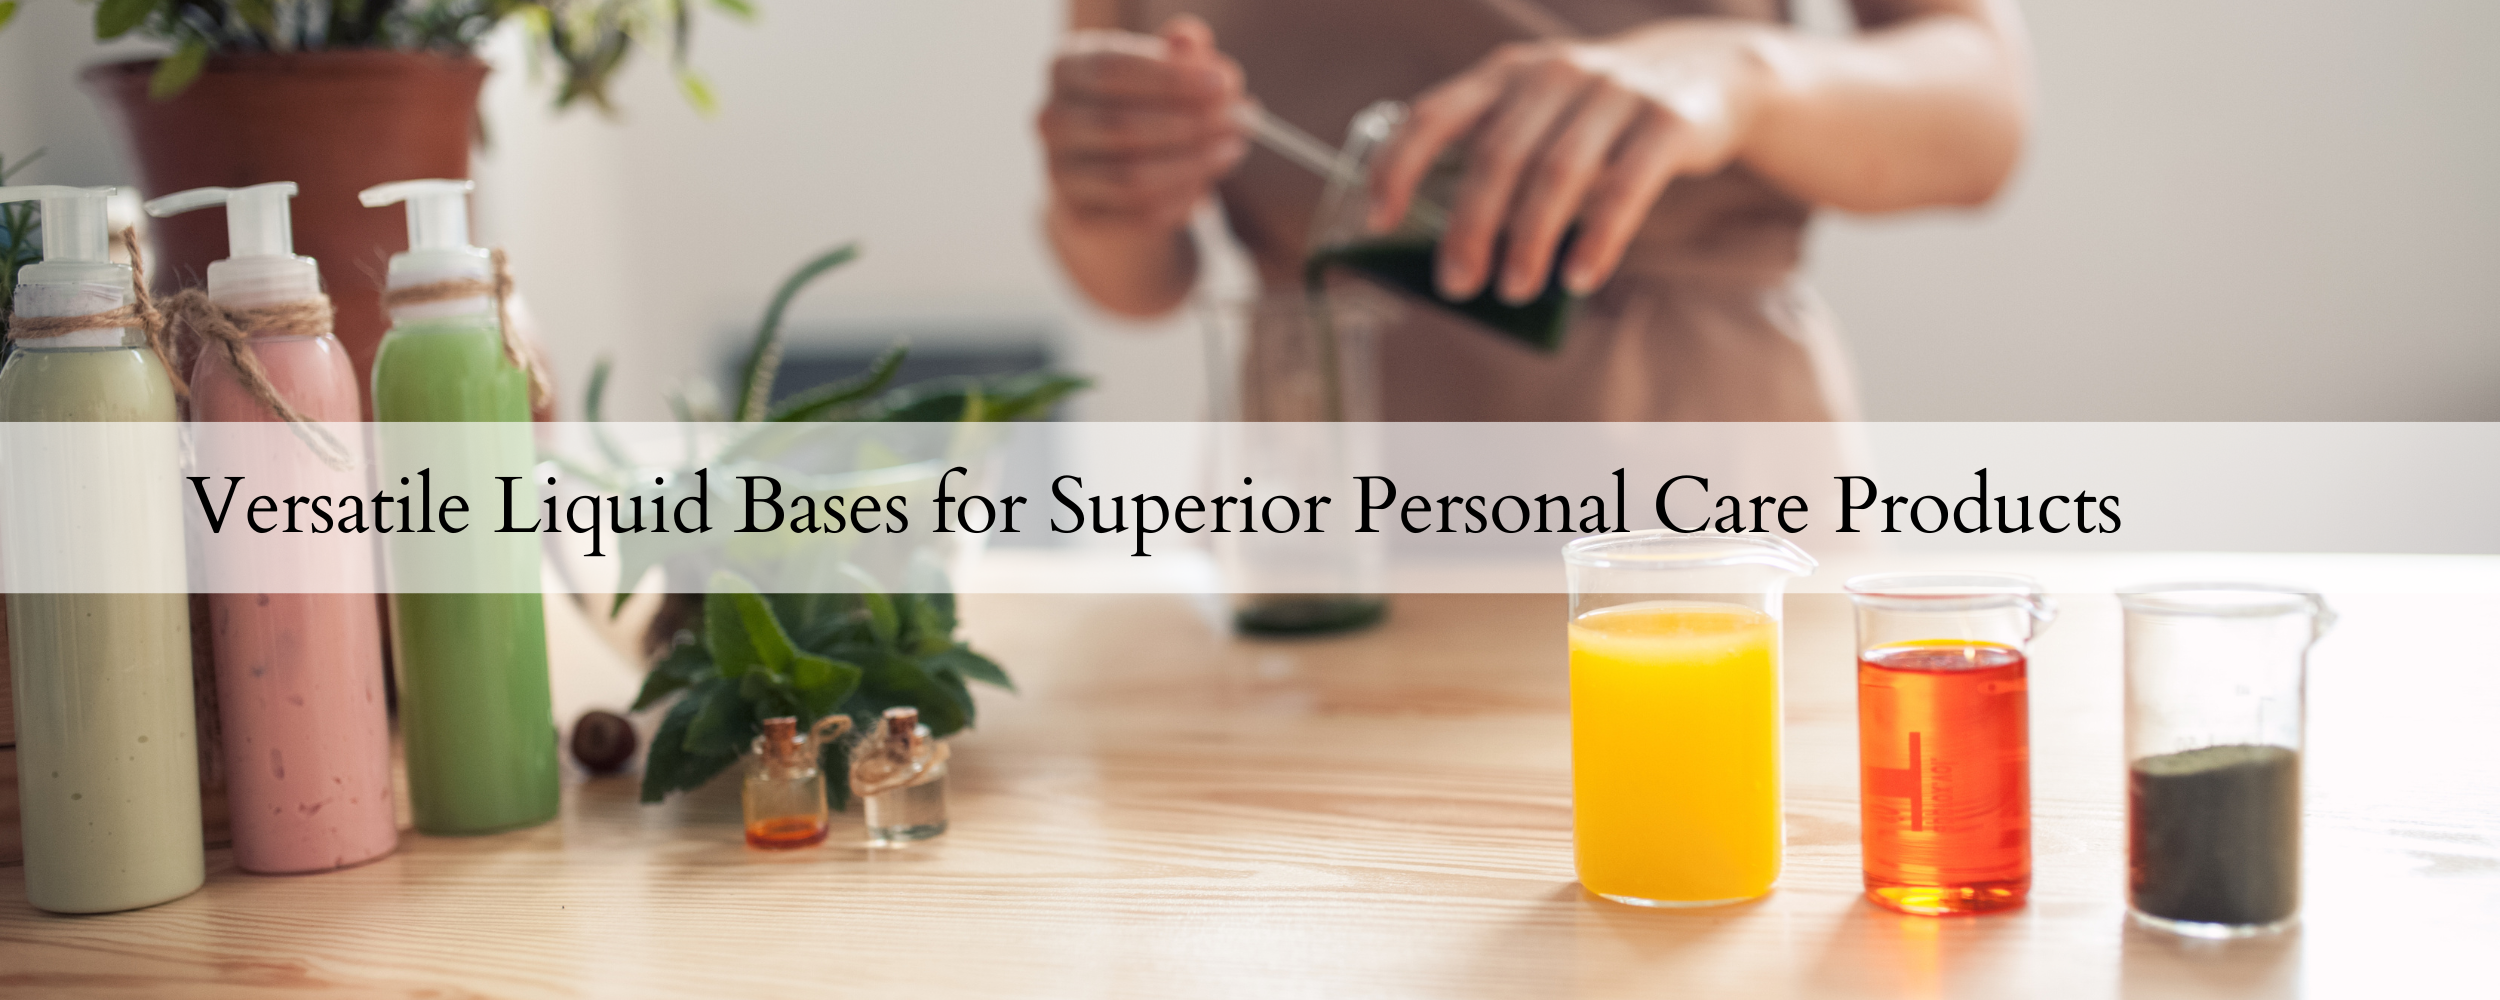 Versatile Liquid Bases for Superior Personal Care Products (3)